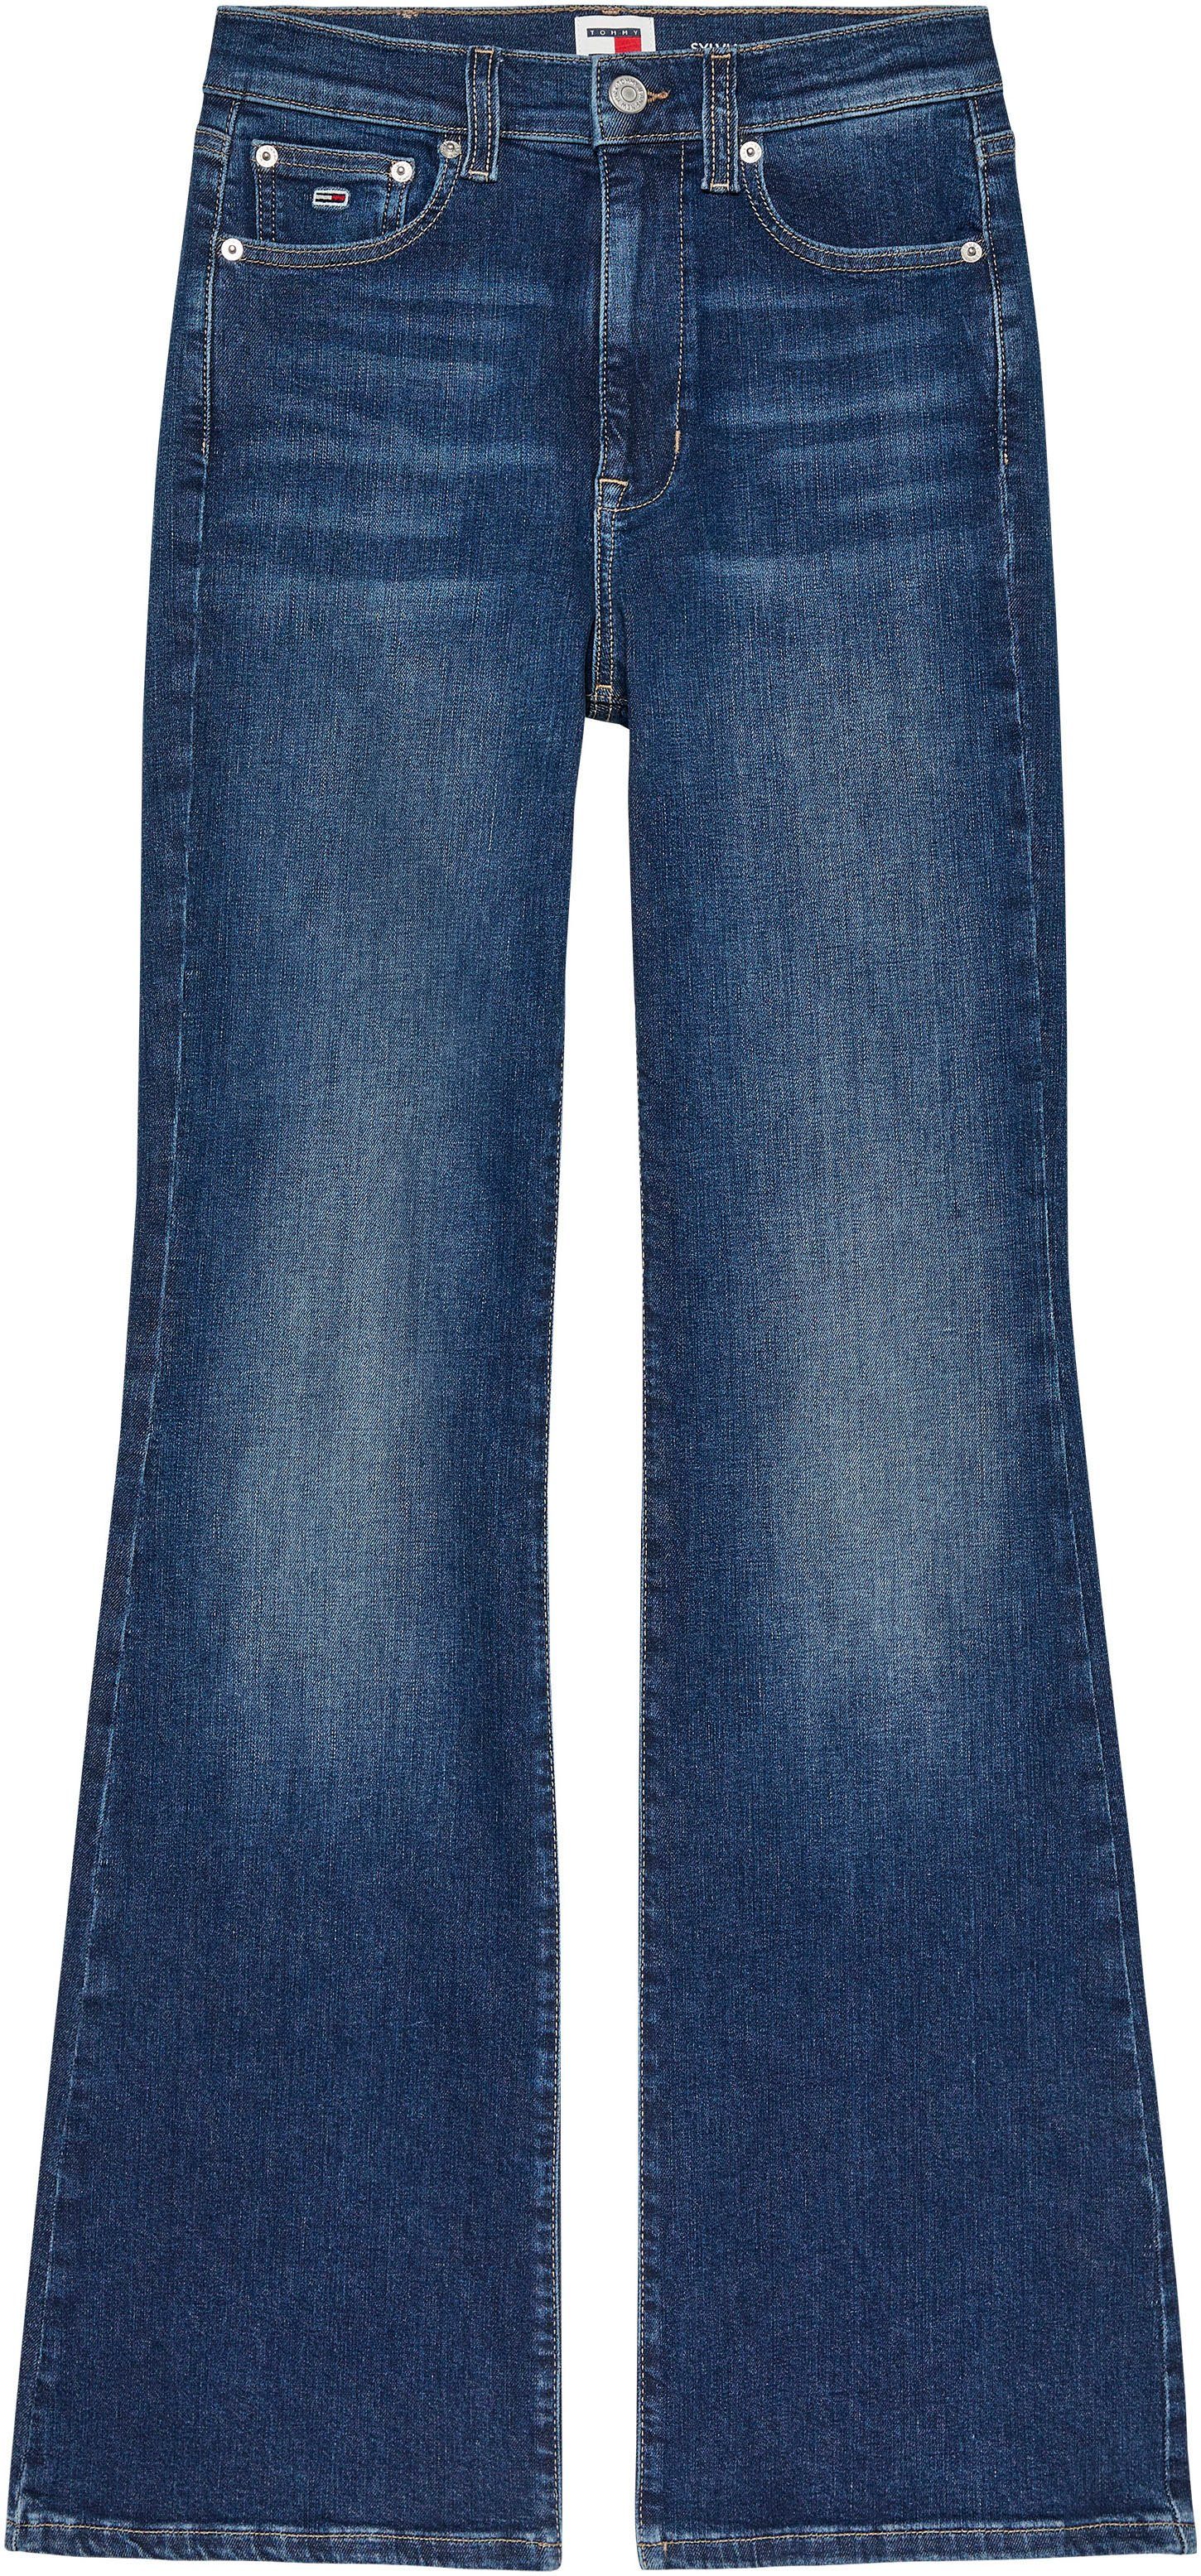 Jeans mit blue30 Jeans mid Sylvia Bequeme Tommy Markenlabel